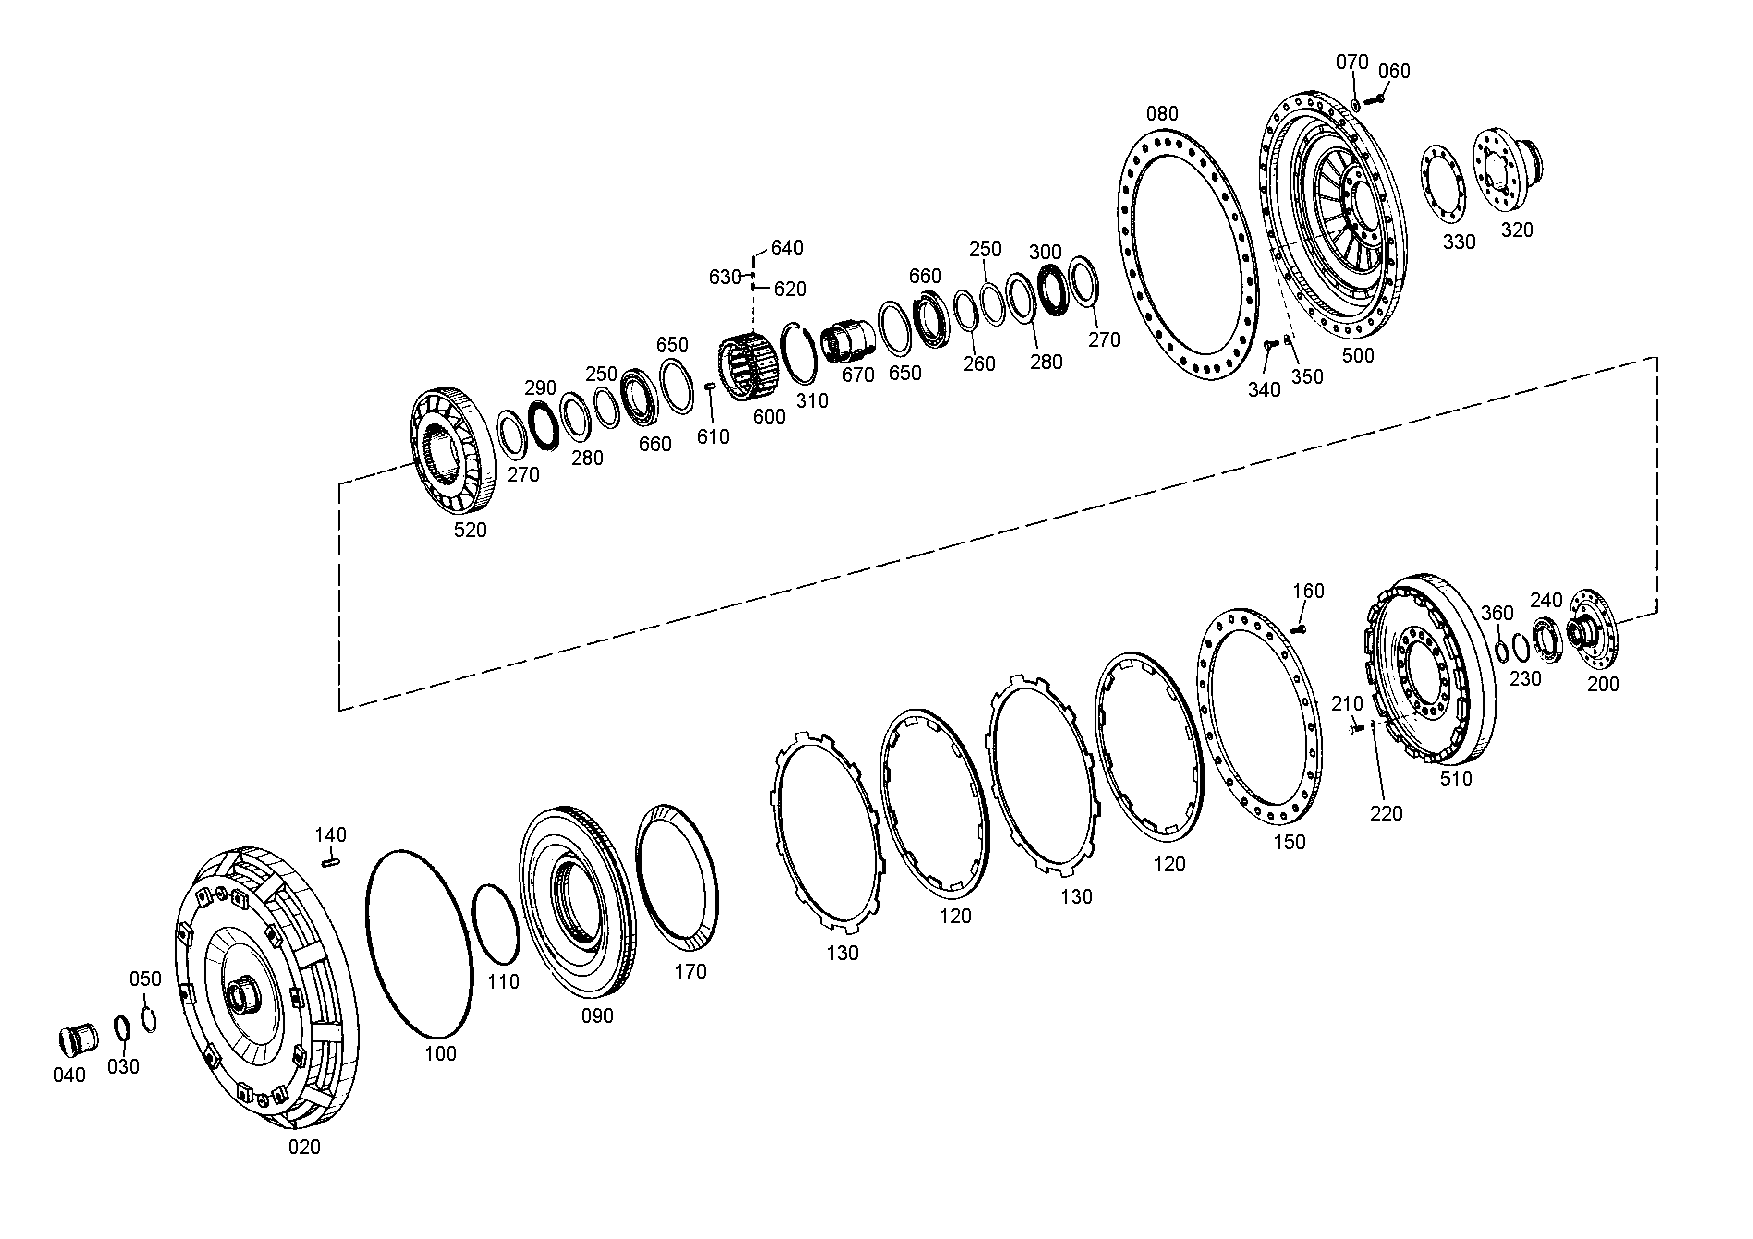 drawing for BEISSBARTH & MUELLER GMBH & CO. 09398062 - END SHIM (figure 3)